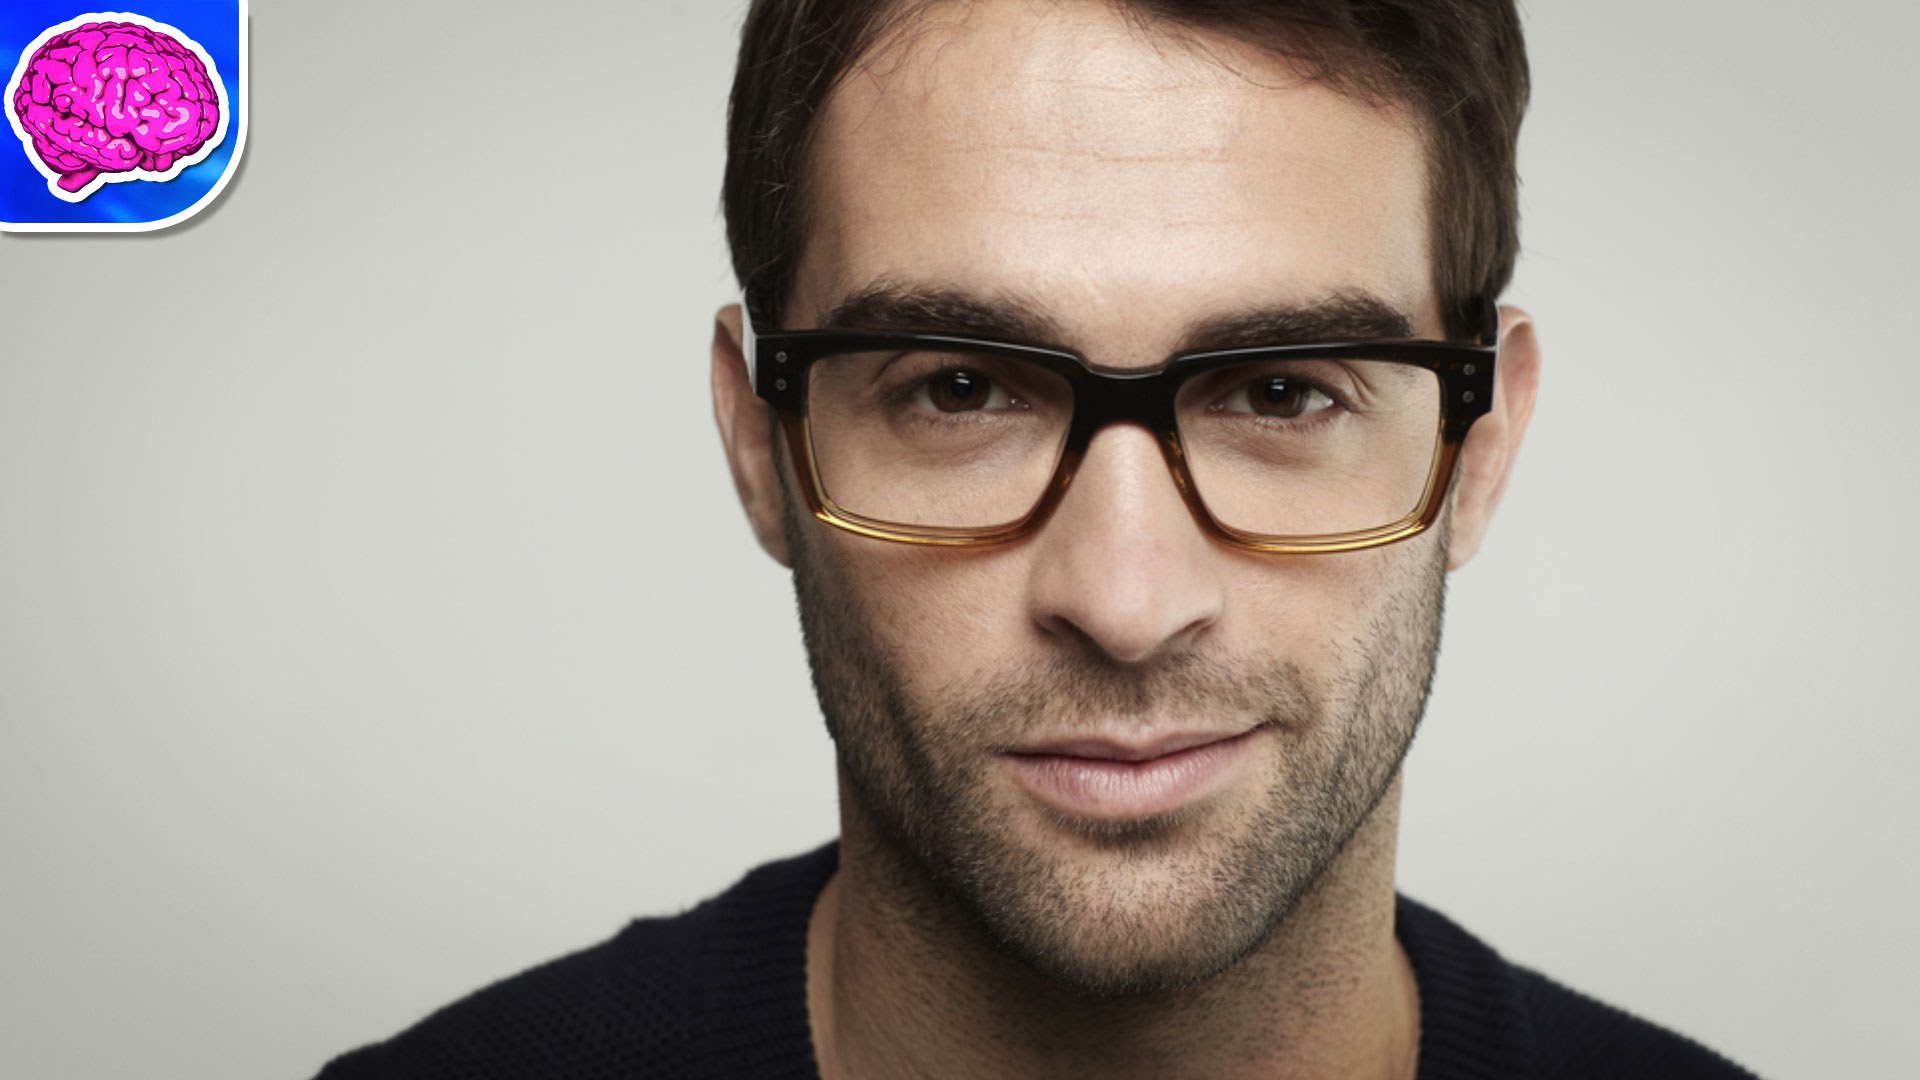 Man with glasses photo